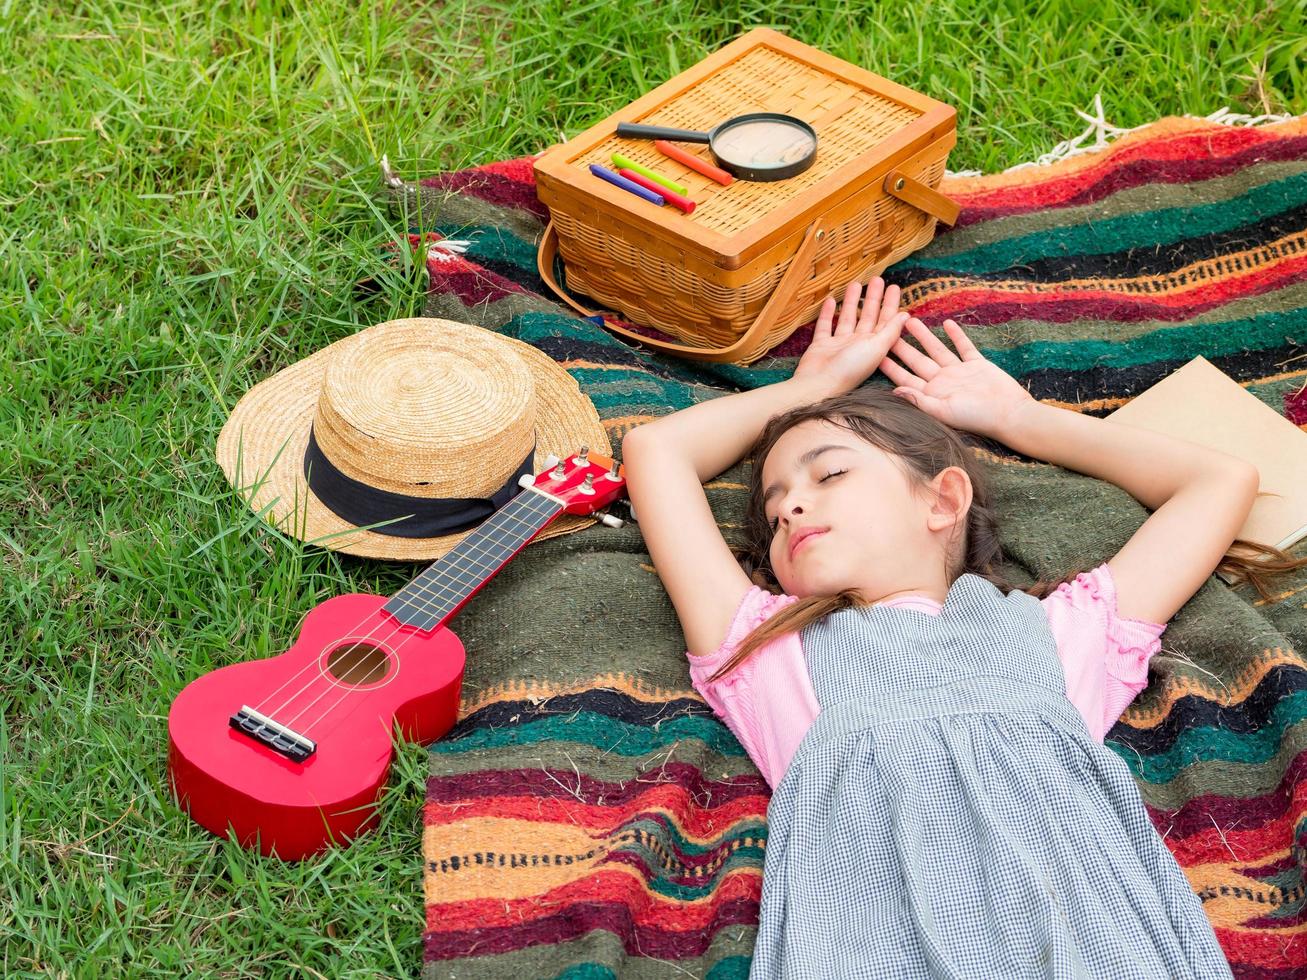 A cute girl sleeps on a blanket after playing and learning photo